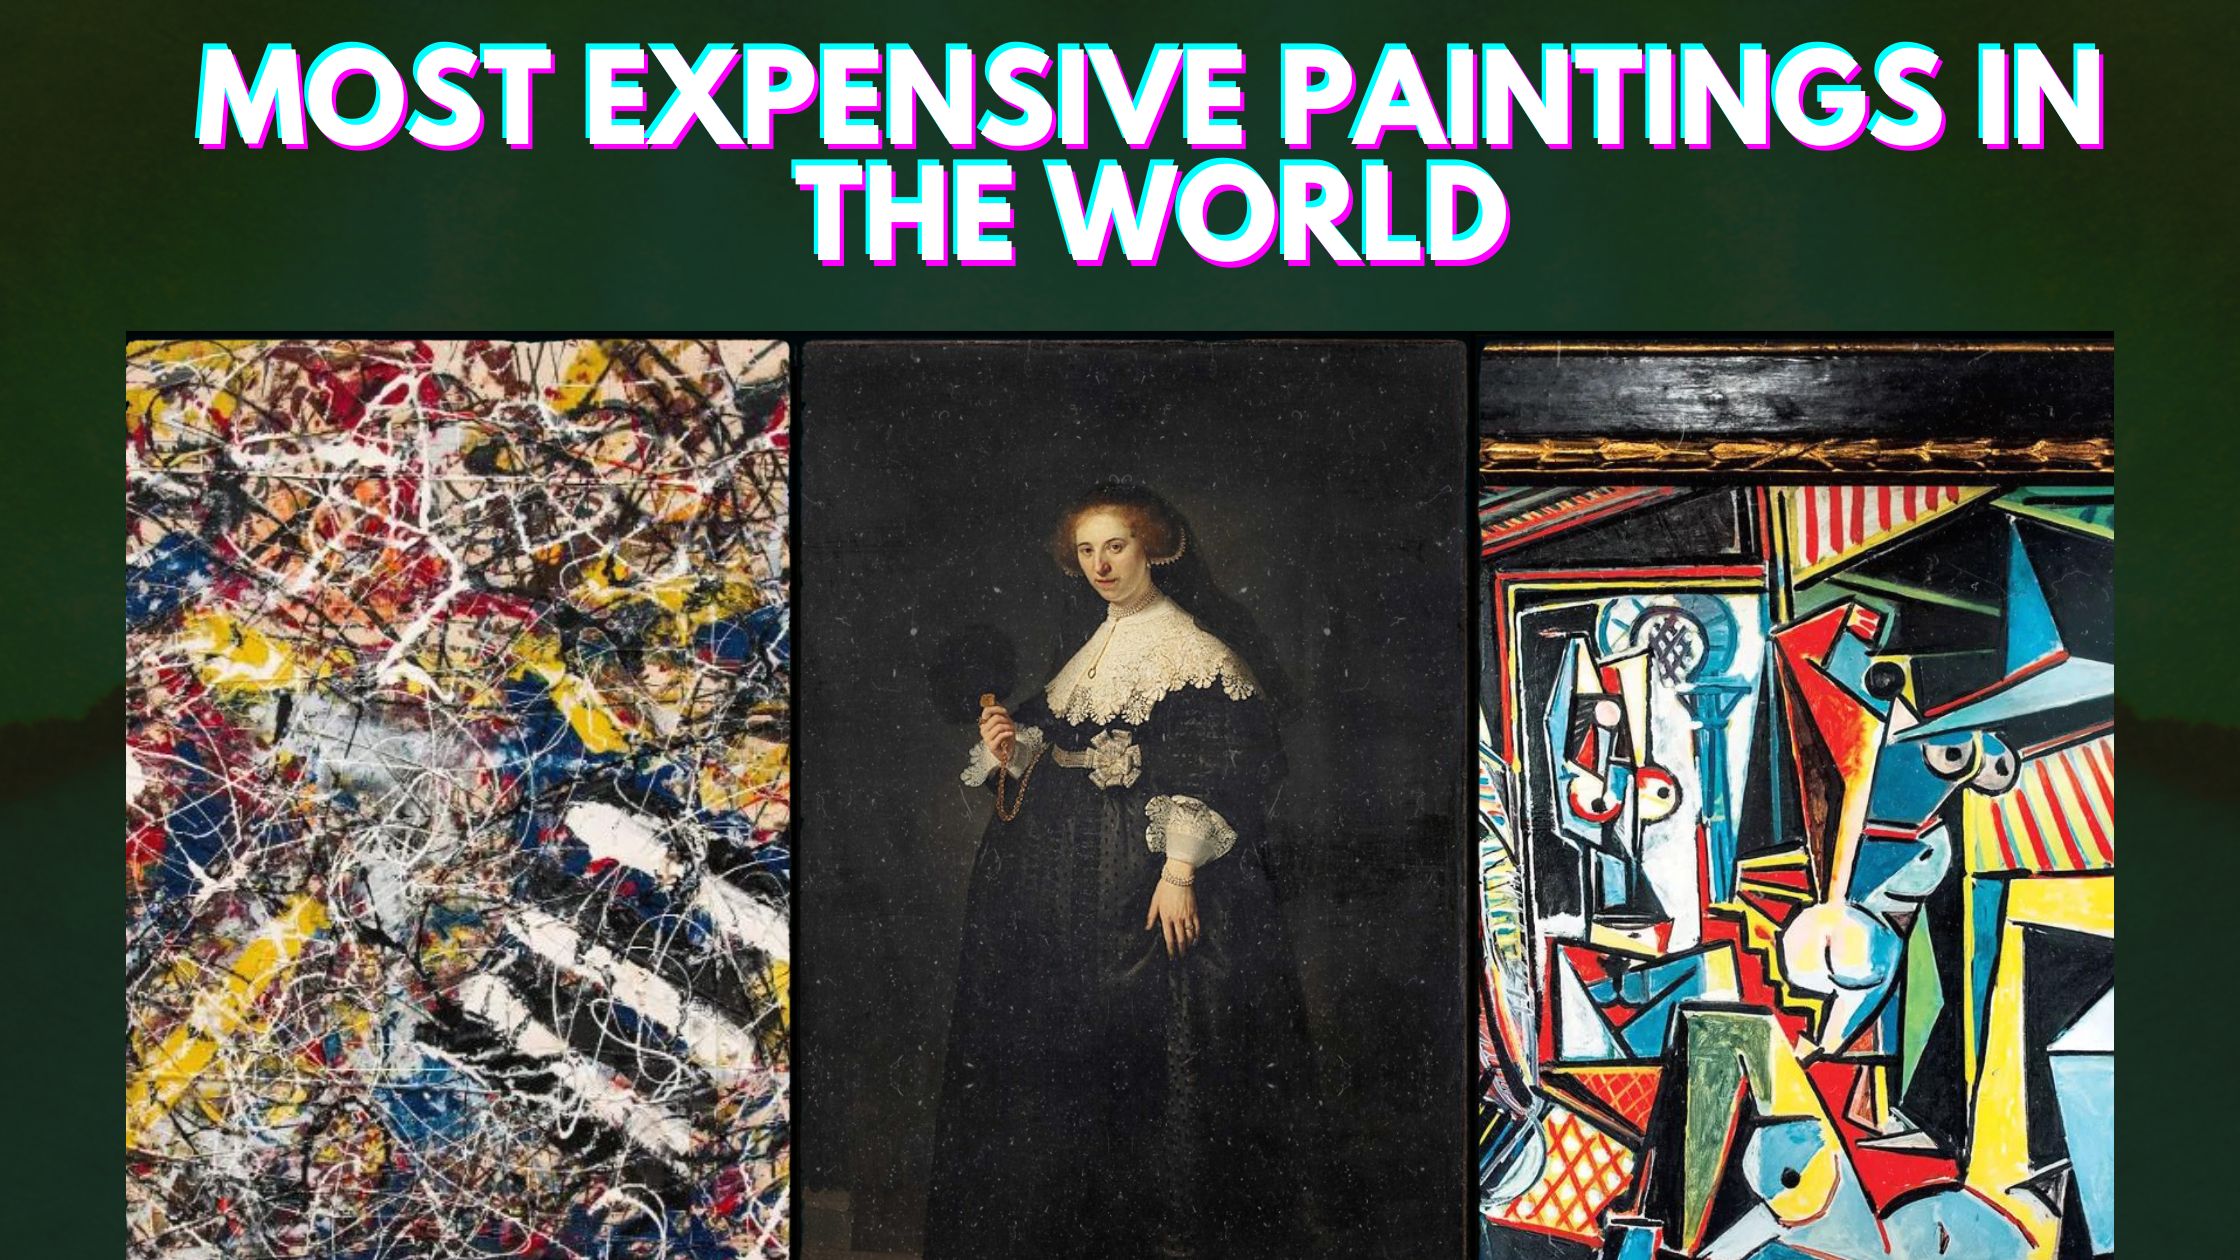 Top 10 Most Expensive Paintings in the World